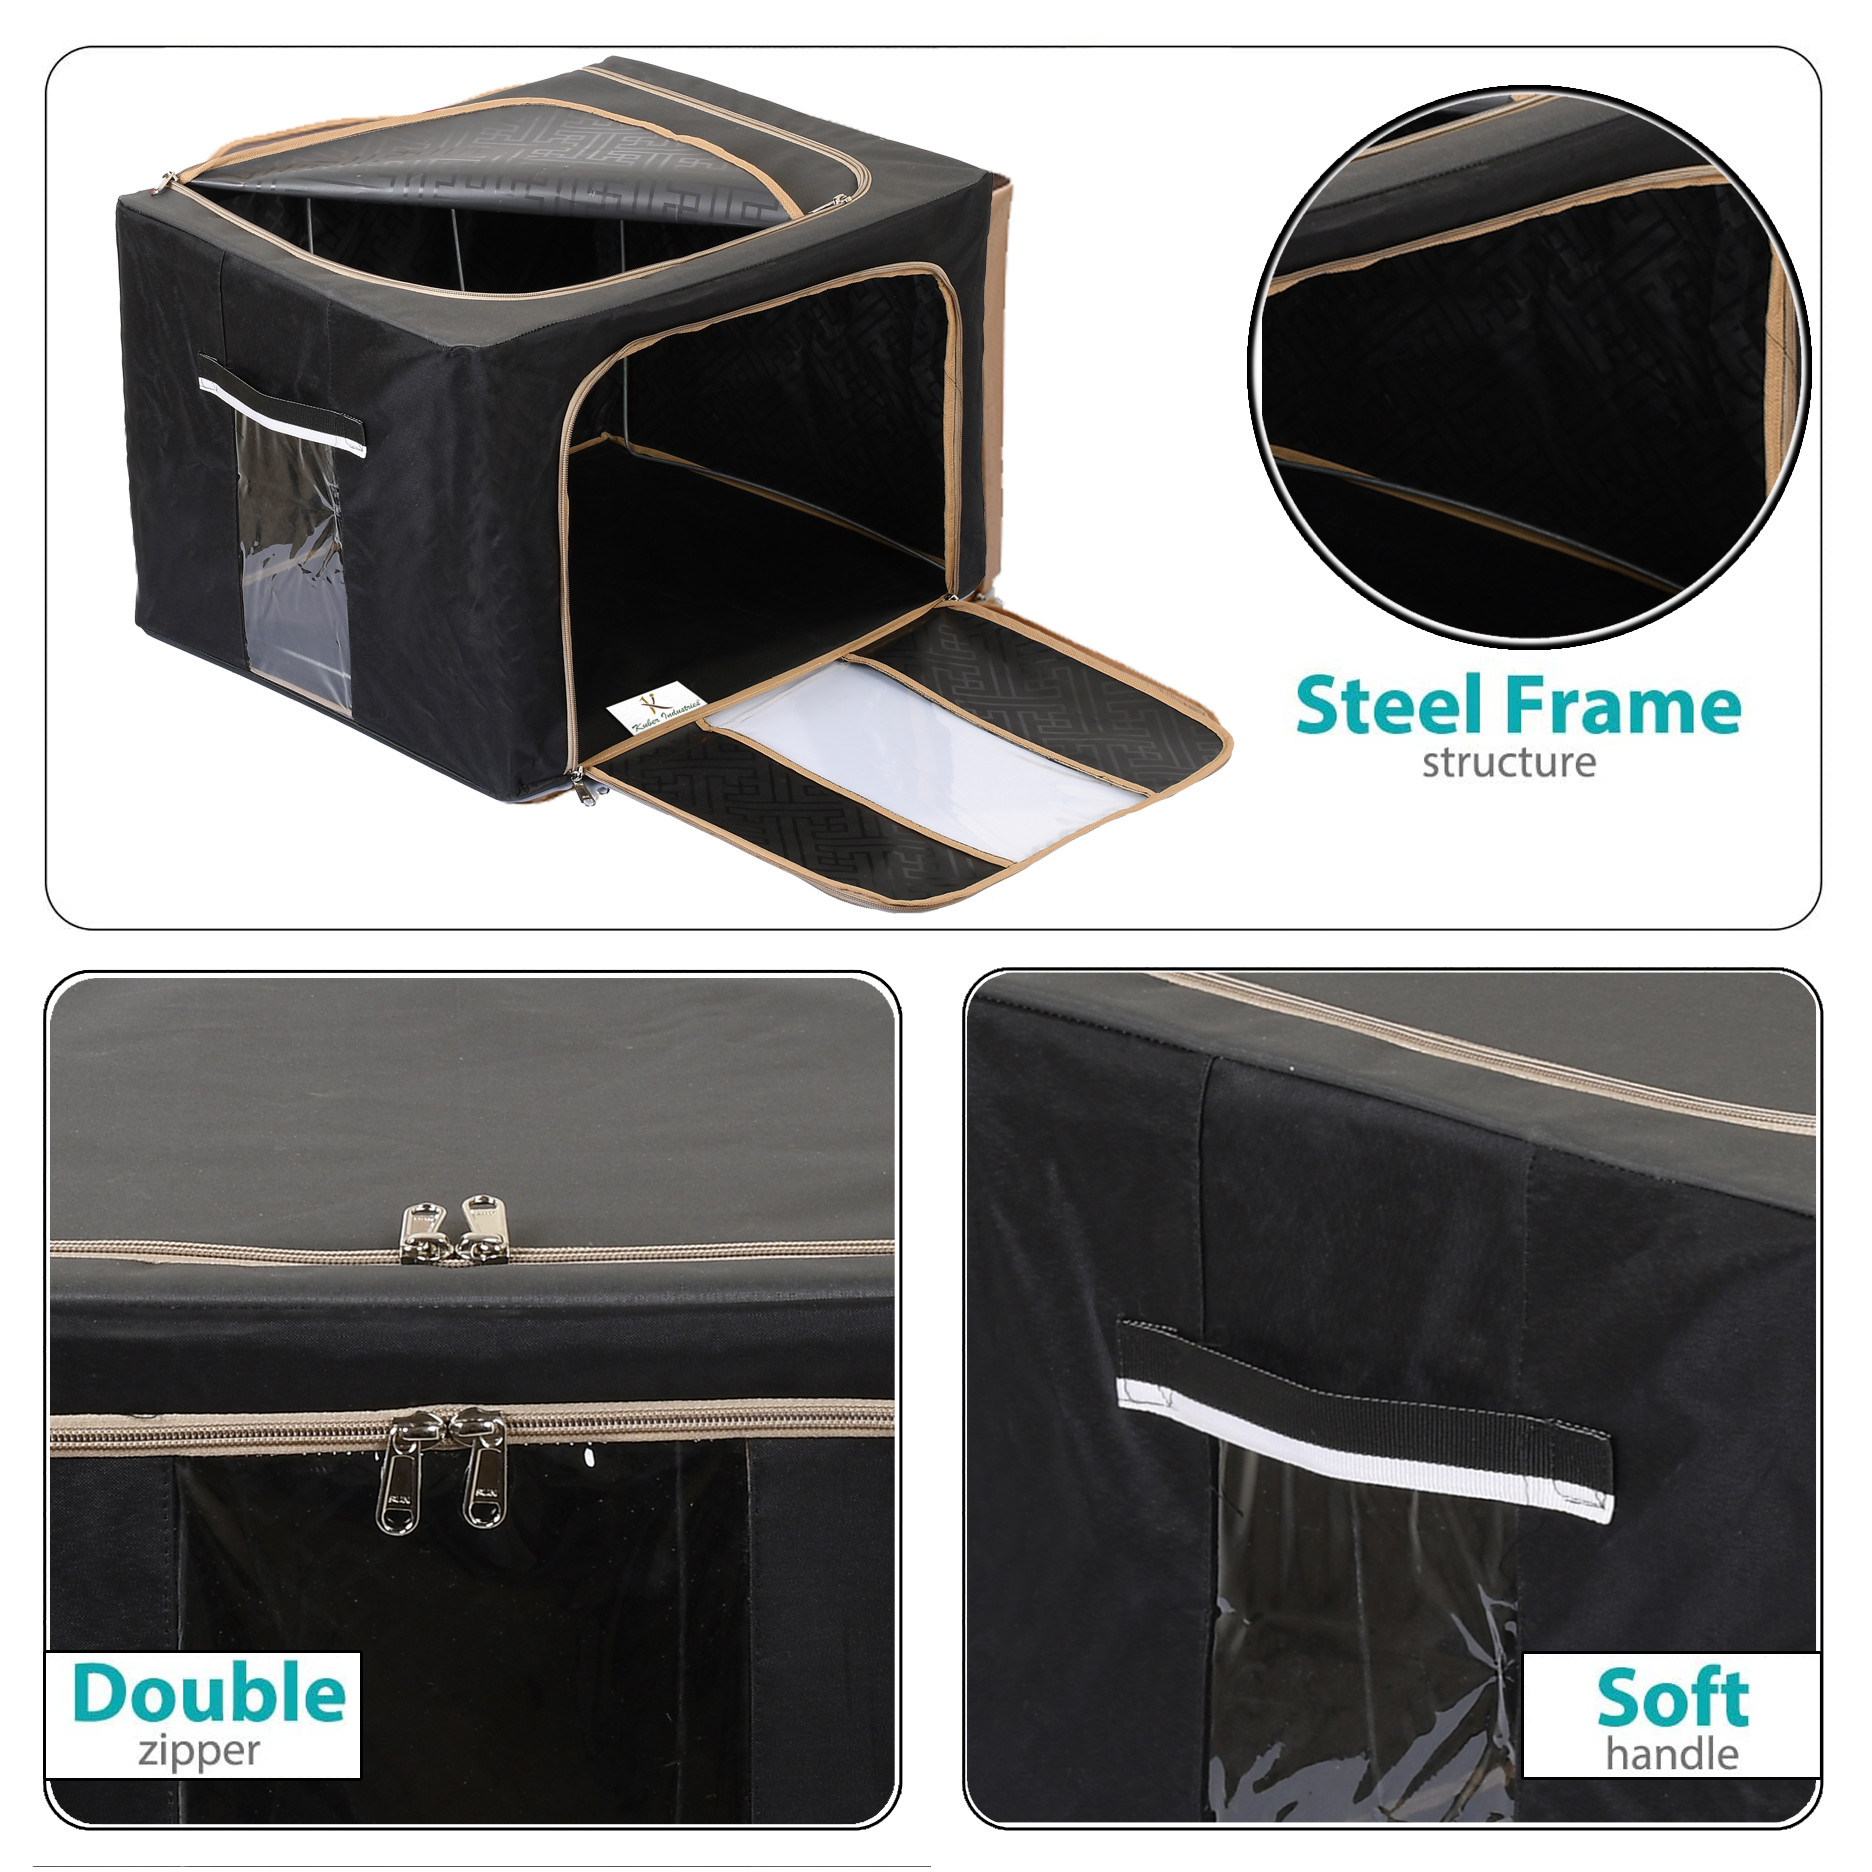 Kuber Industries Steel Frame Storage Box/Organizer For Clothing, Blankets, Bedding With Clear Window, 44Ltr. (Black & Grey)-44KM0301